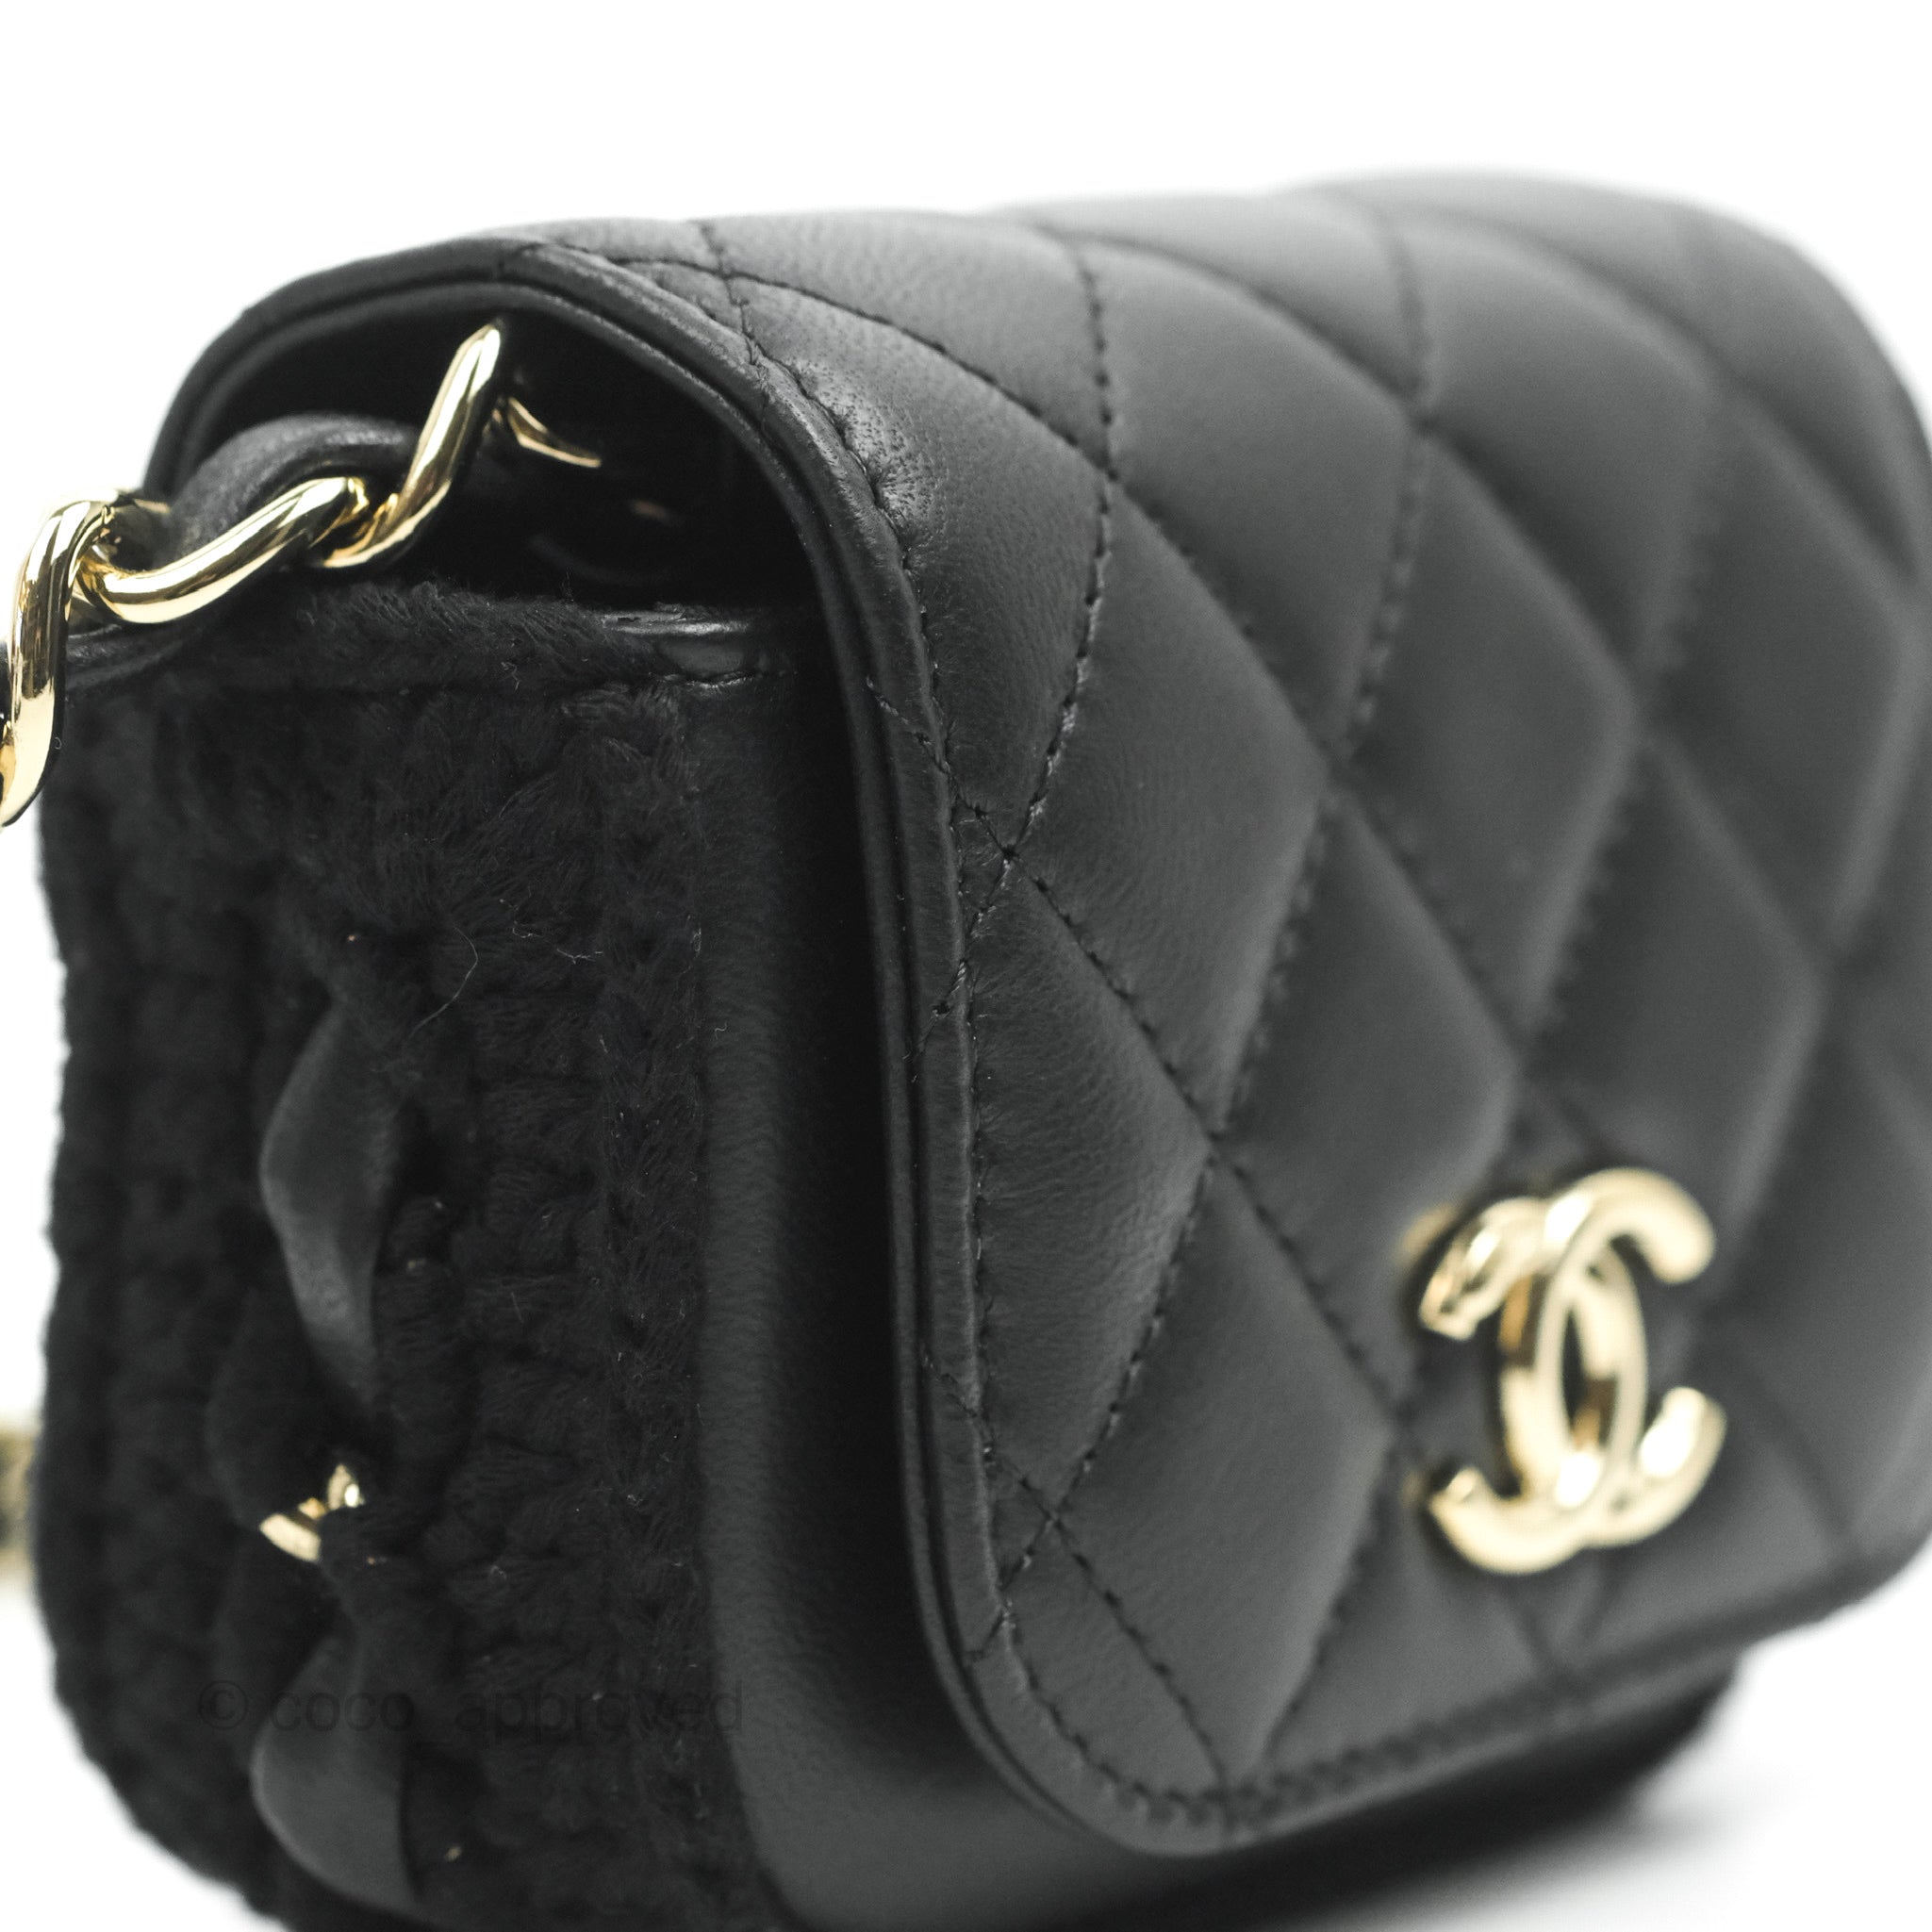 Chanel 19 Small Pouch Black Lambskin Gold Hardware – Coco Approved